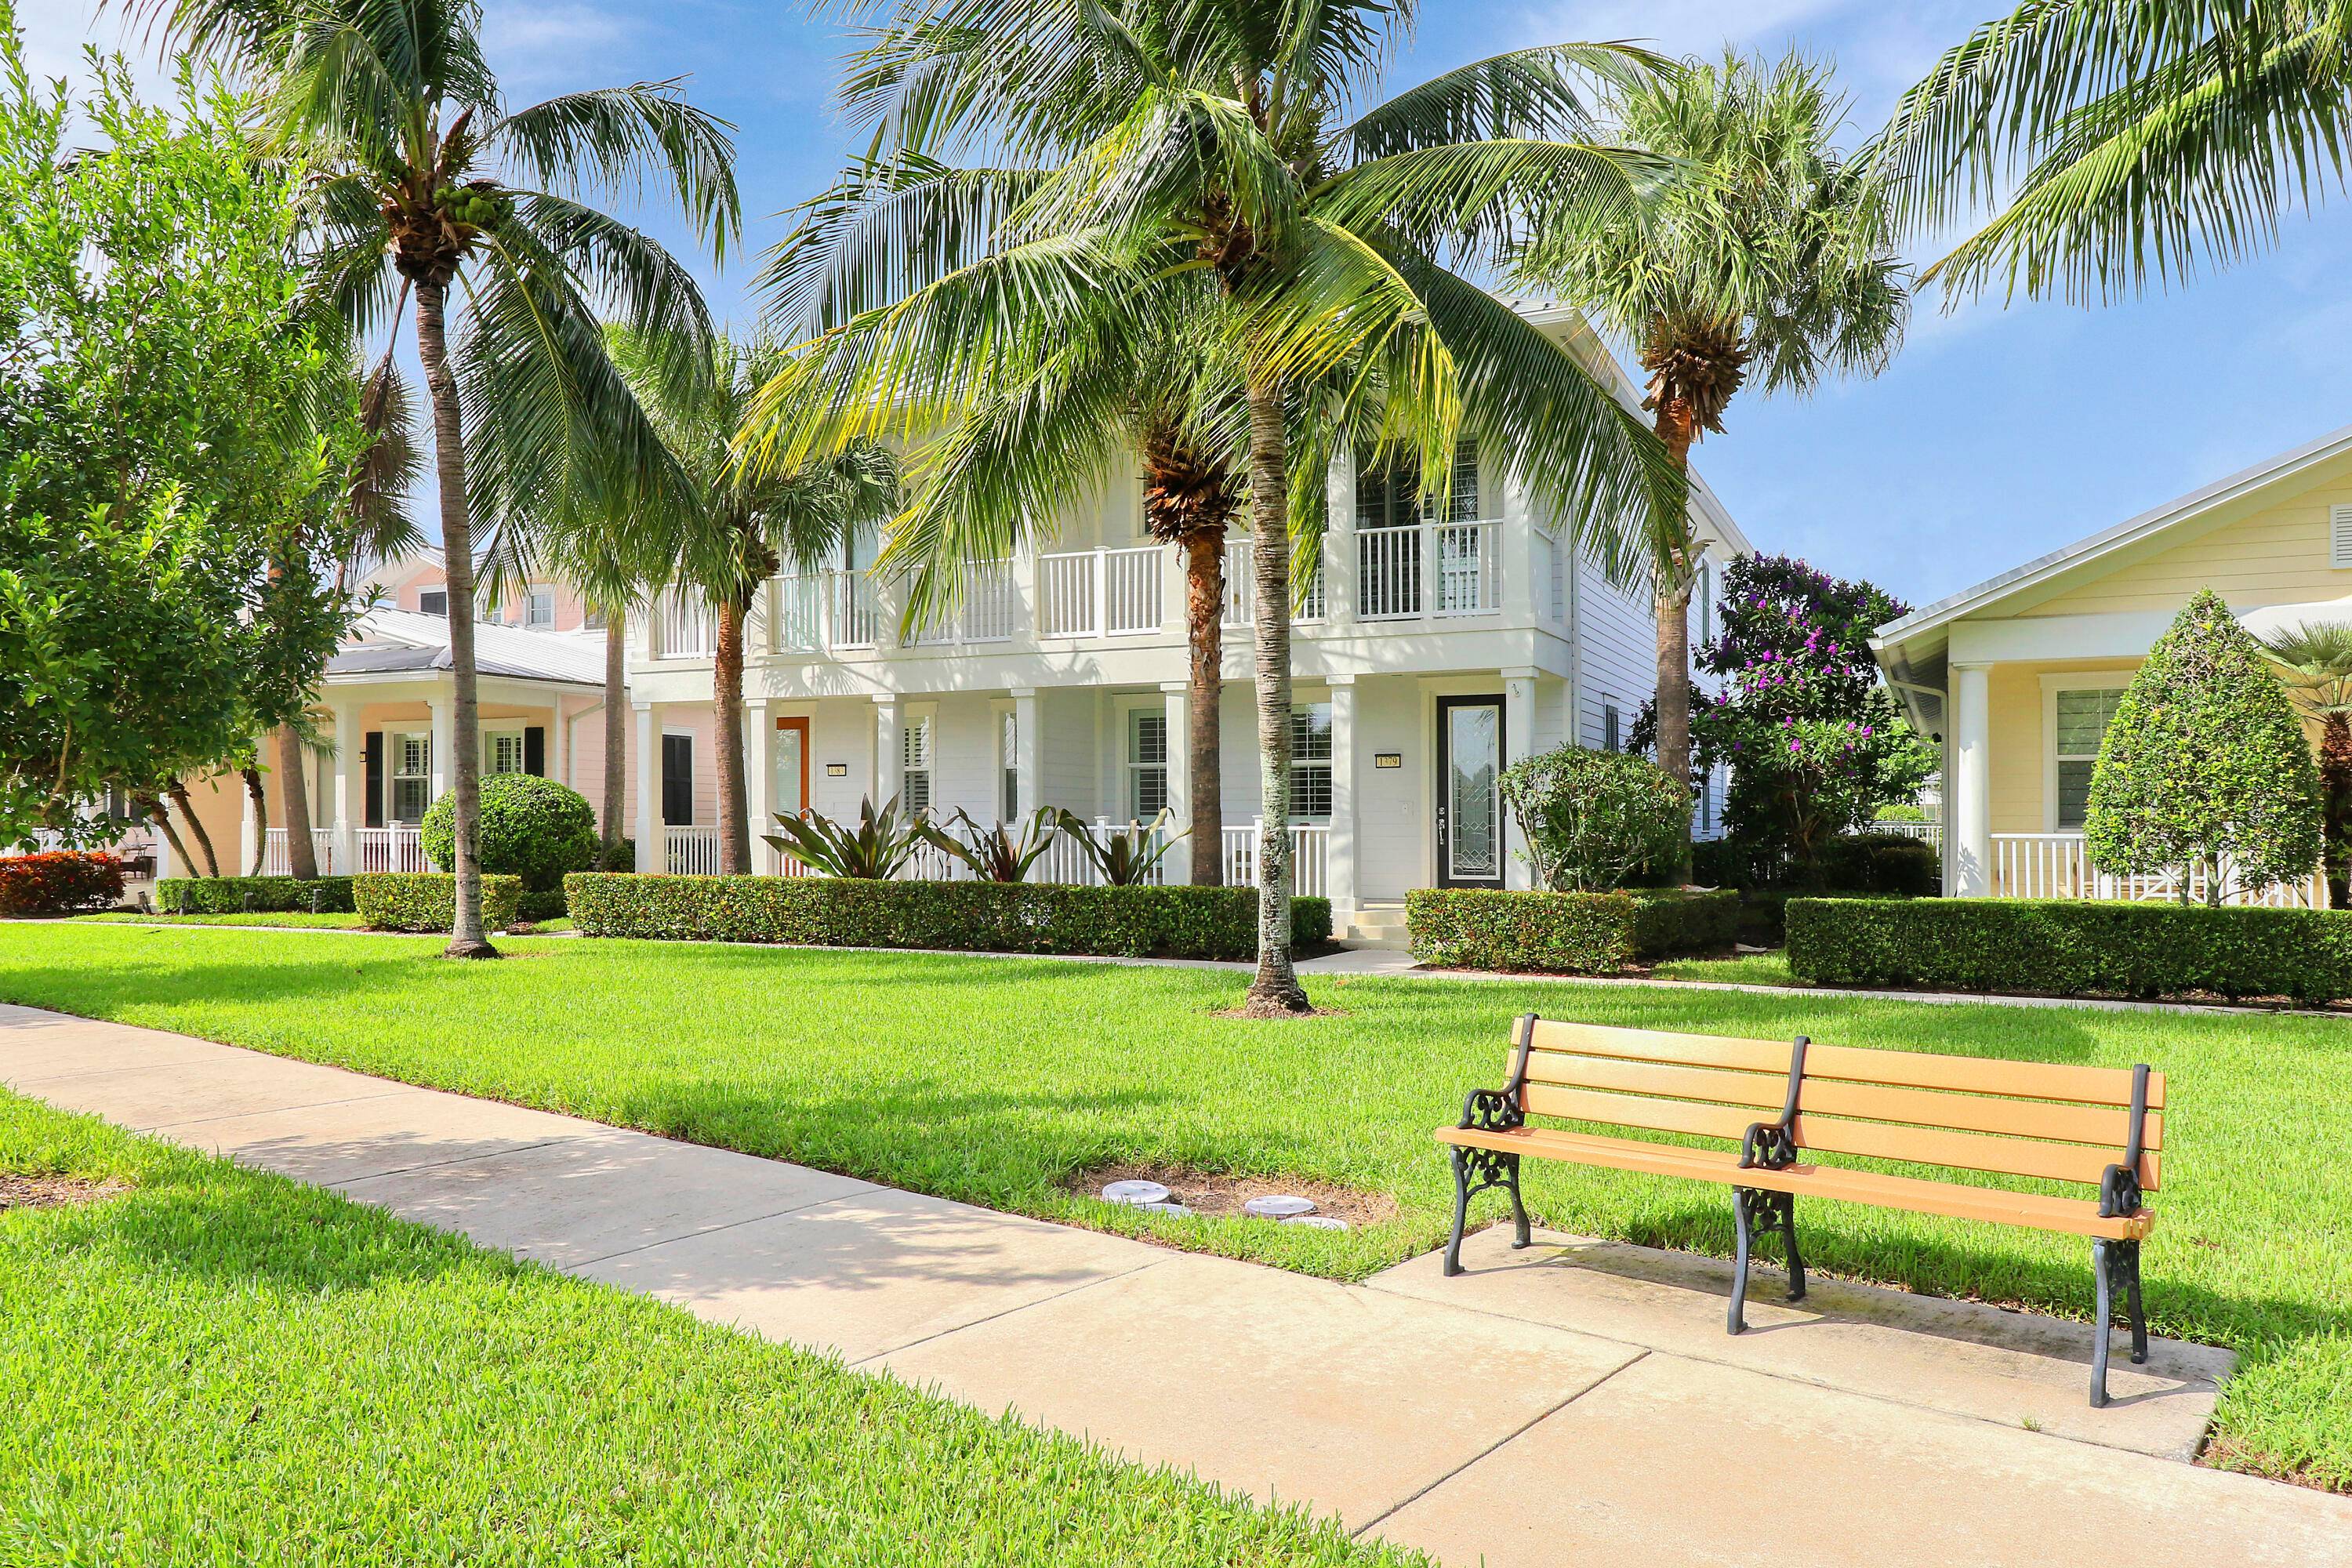 Welcome to this stunning home in the desirable Mallory Creek community of Jupiter, FL !